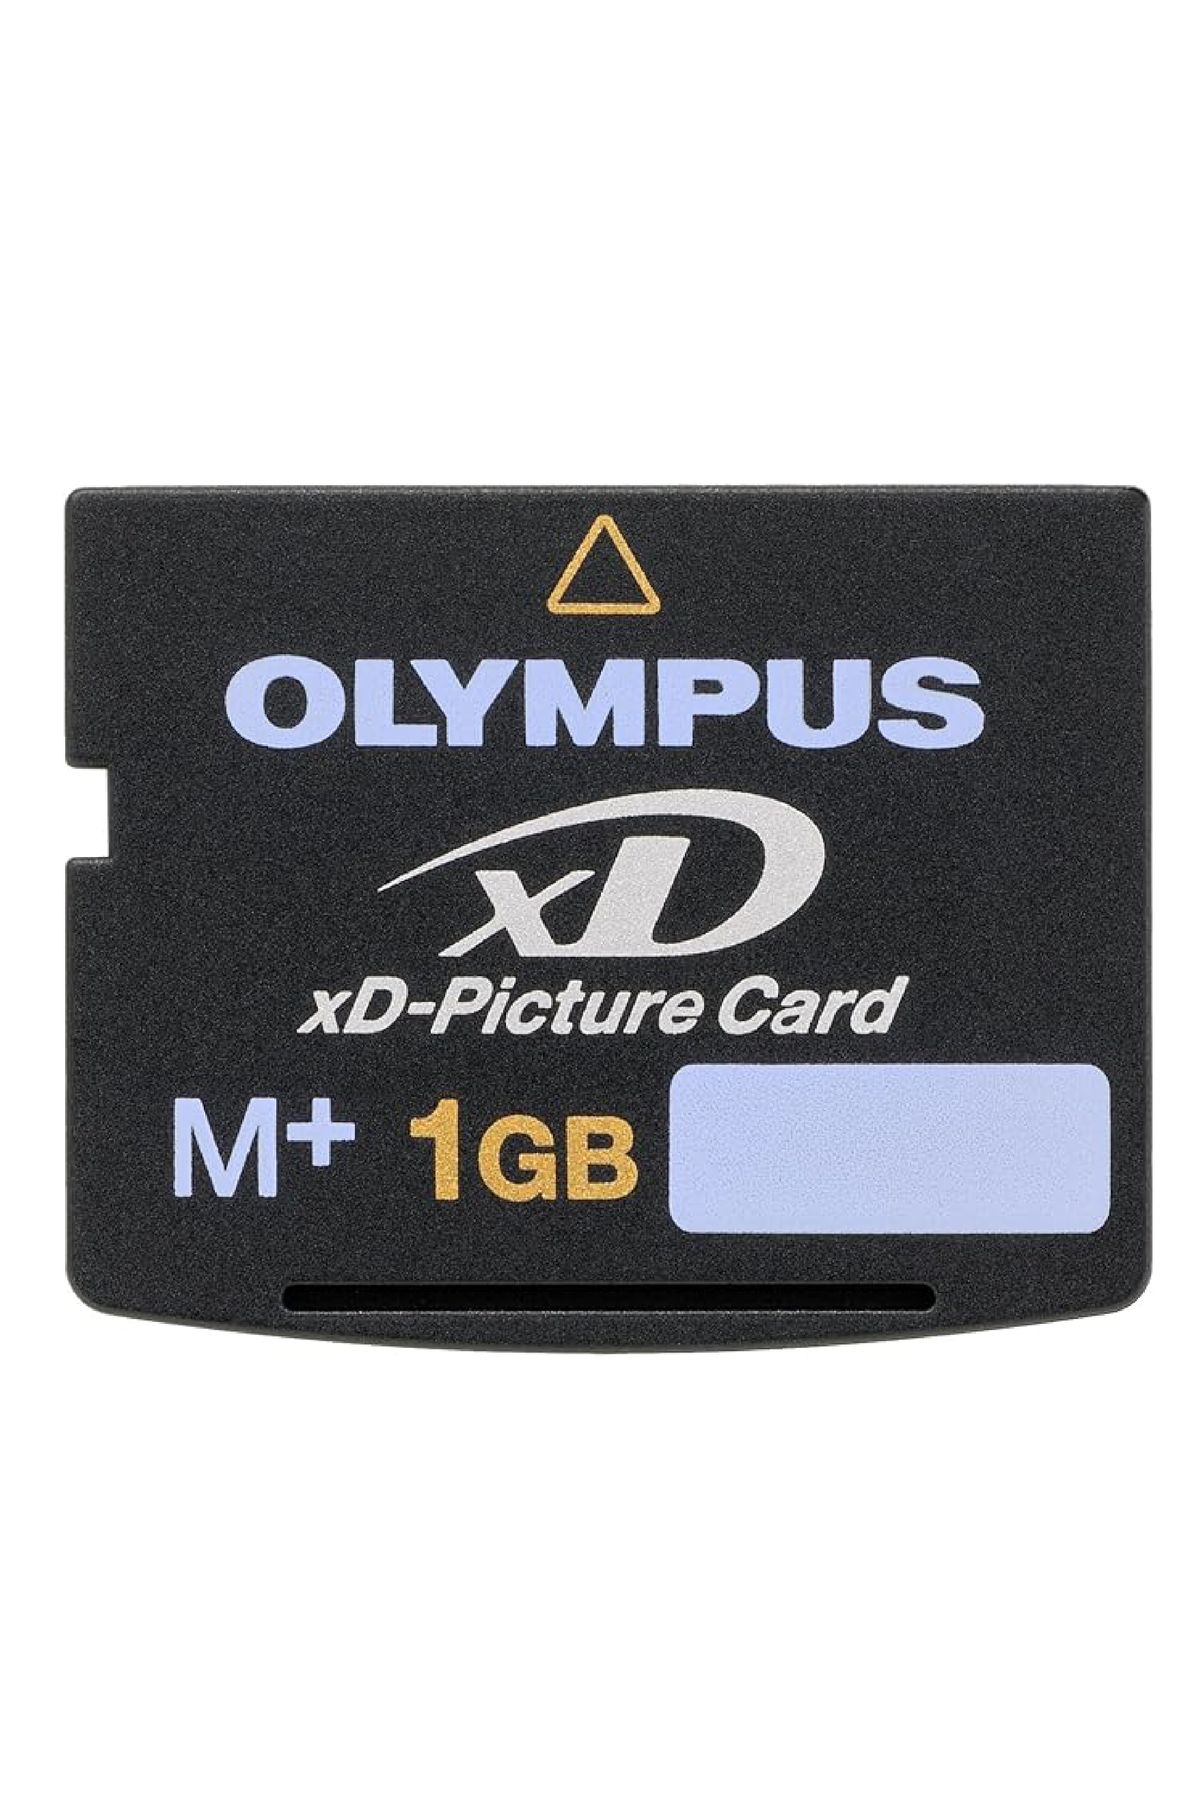 Olympus 1gb xD Picture Card Type M